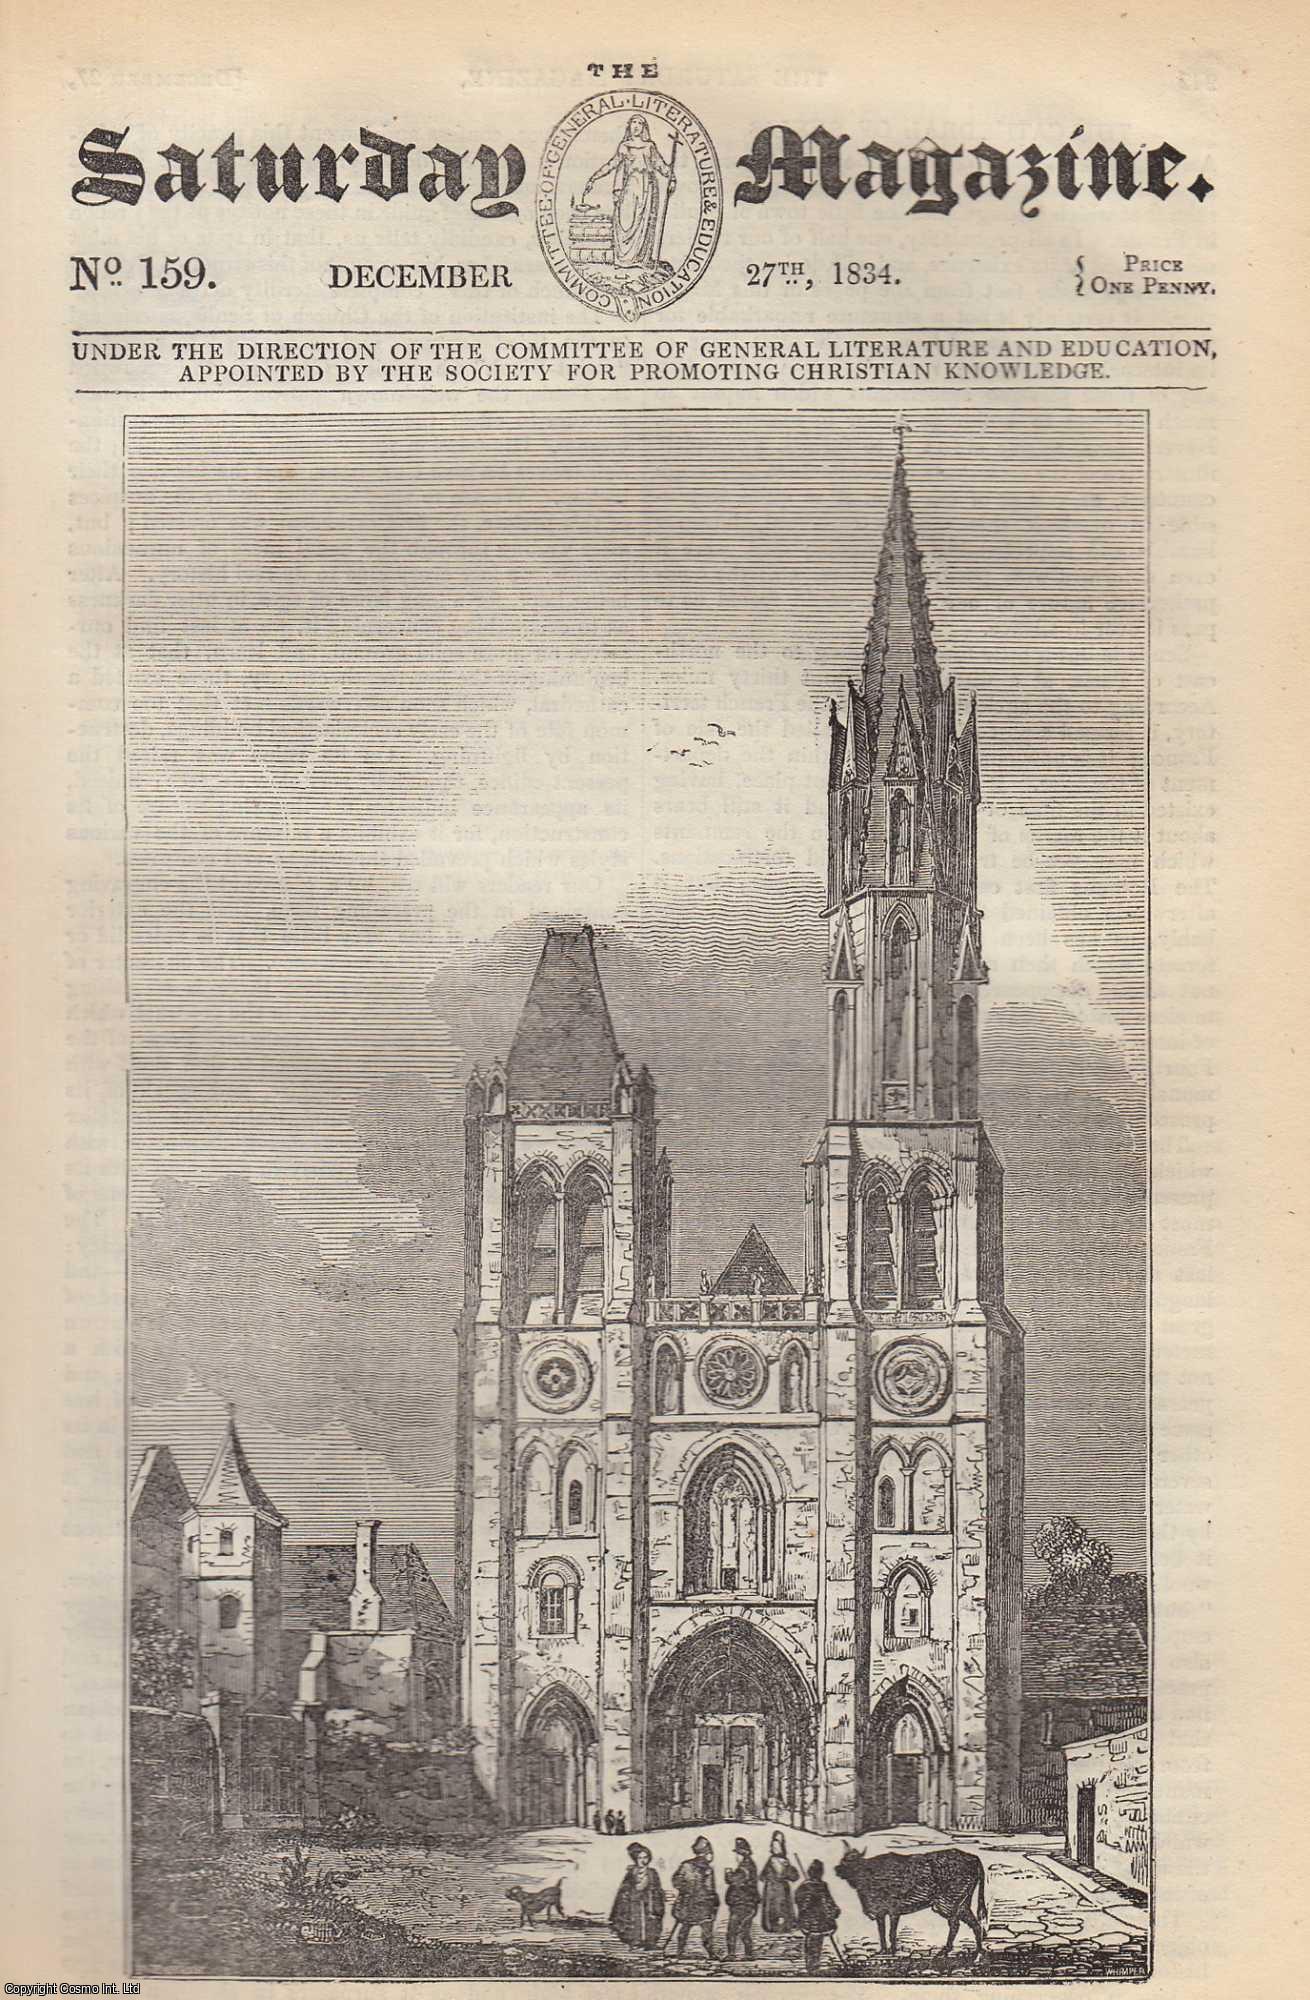 Saturday Magazine - The Cathedral of Senlis; The Scilly Islands. Issue No. 159. December, 1834. A complete rare weekly issue of the Saturday Magazine, 1834.